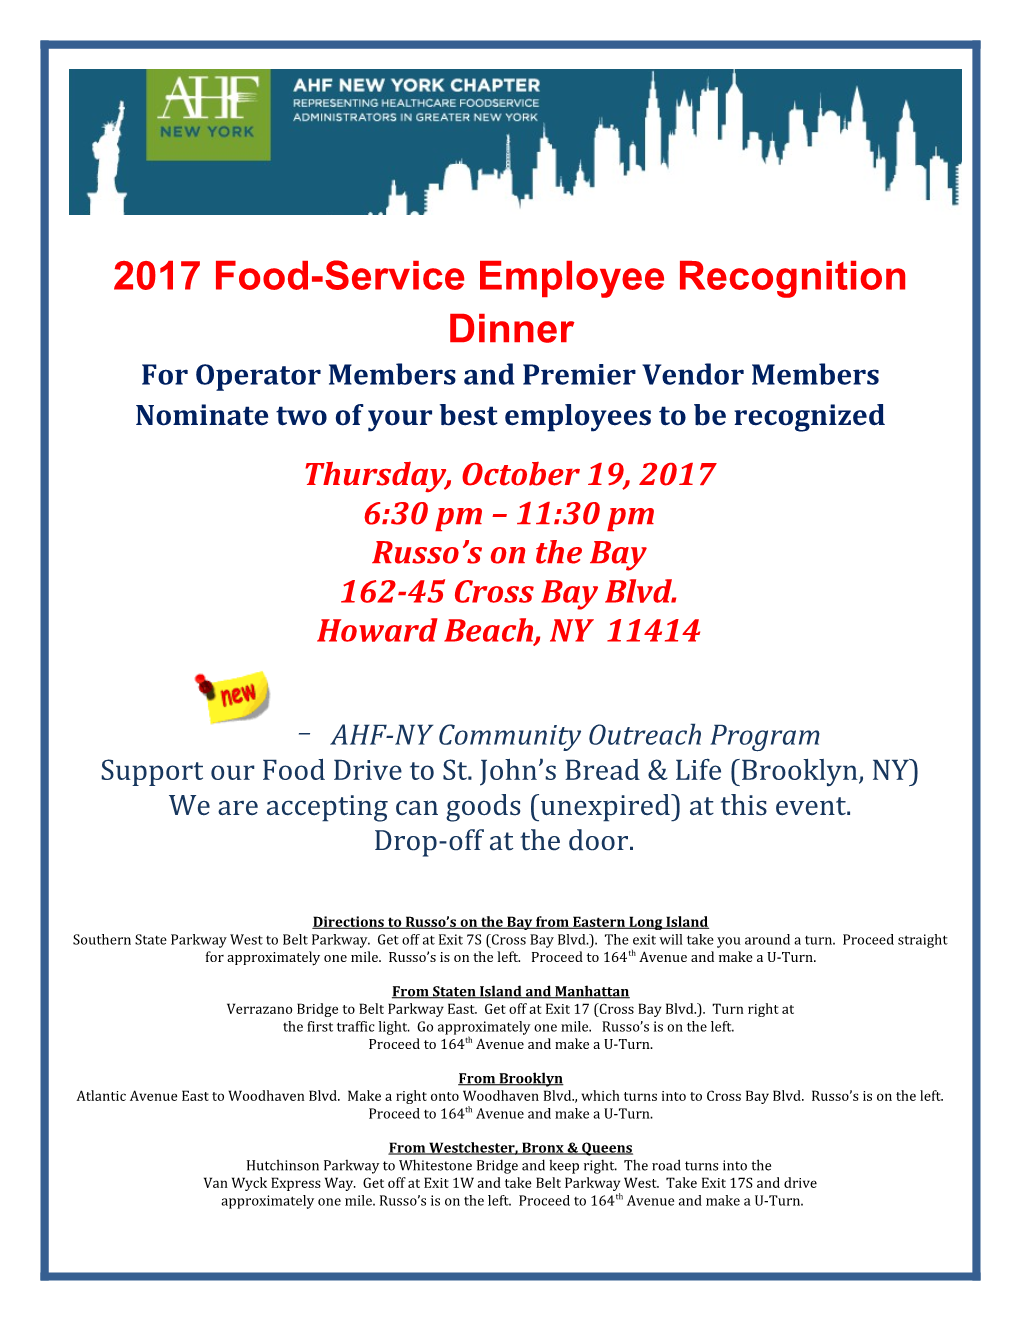 2017 Food-Service Employee Recognition Dinner for Operator Members and Premier Vendor